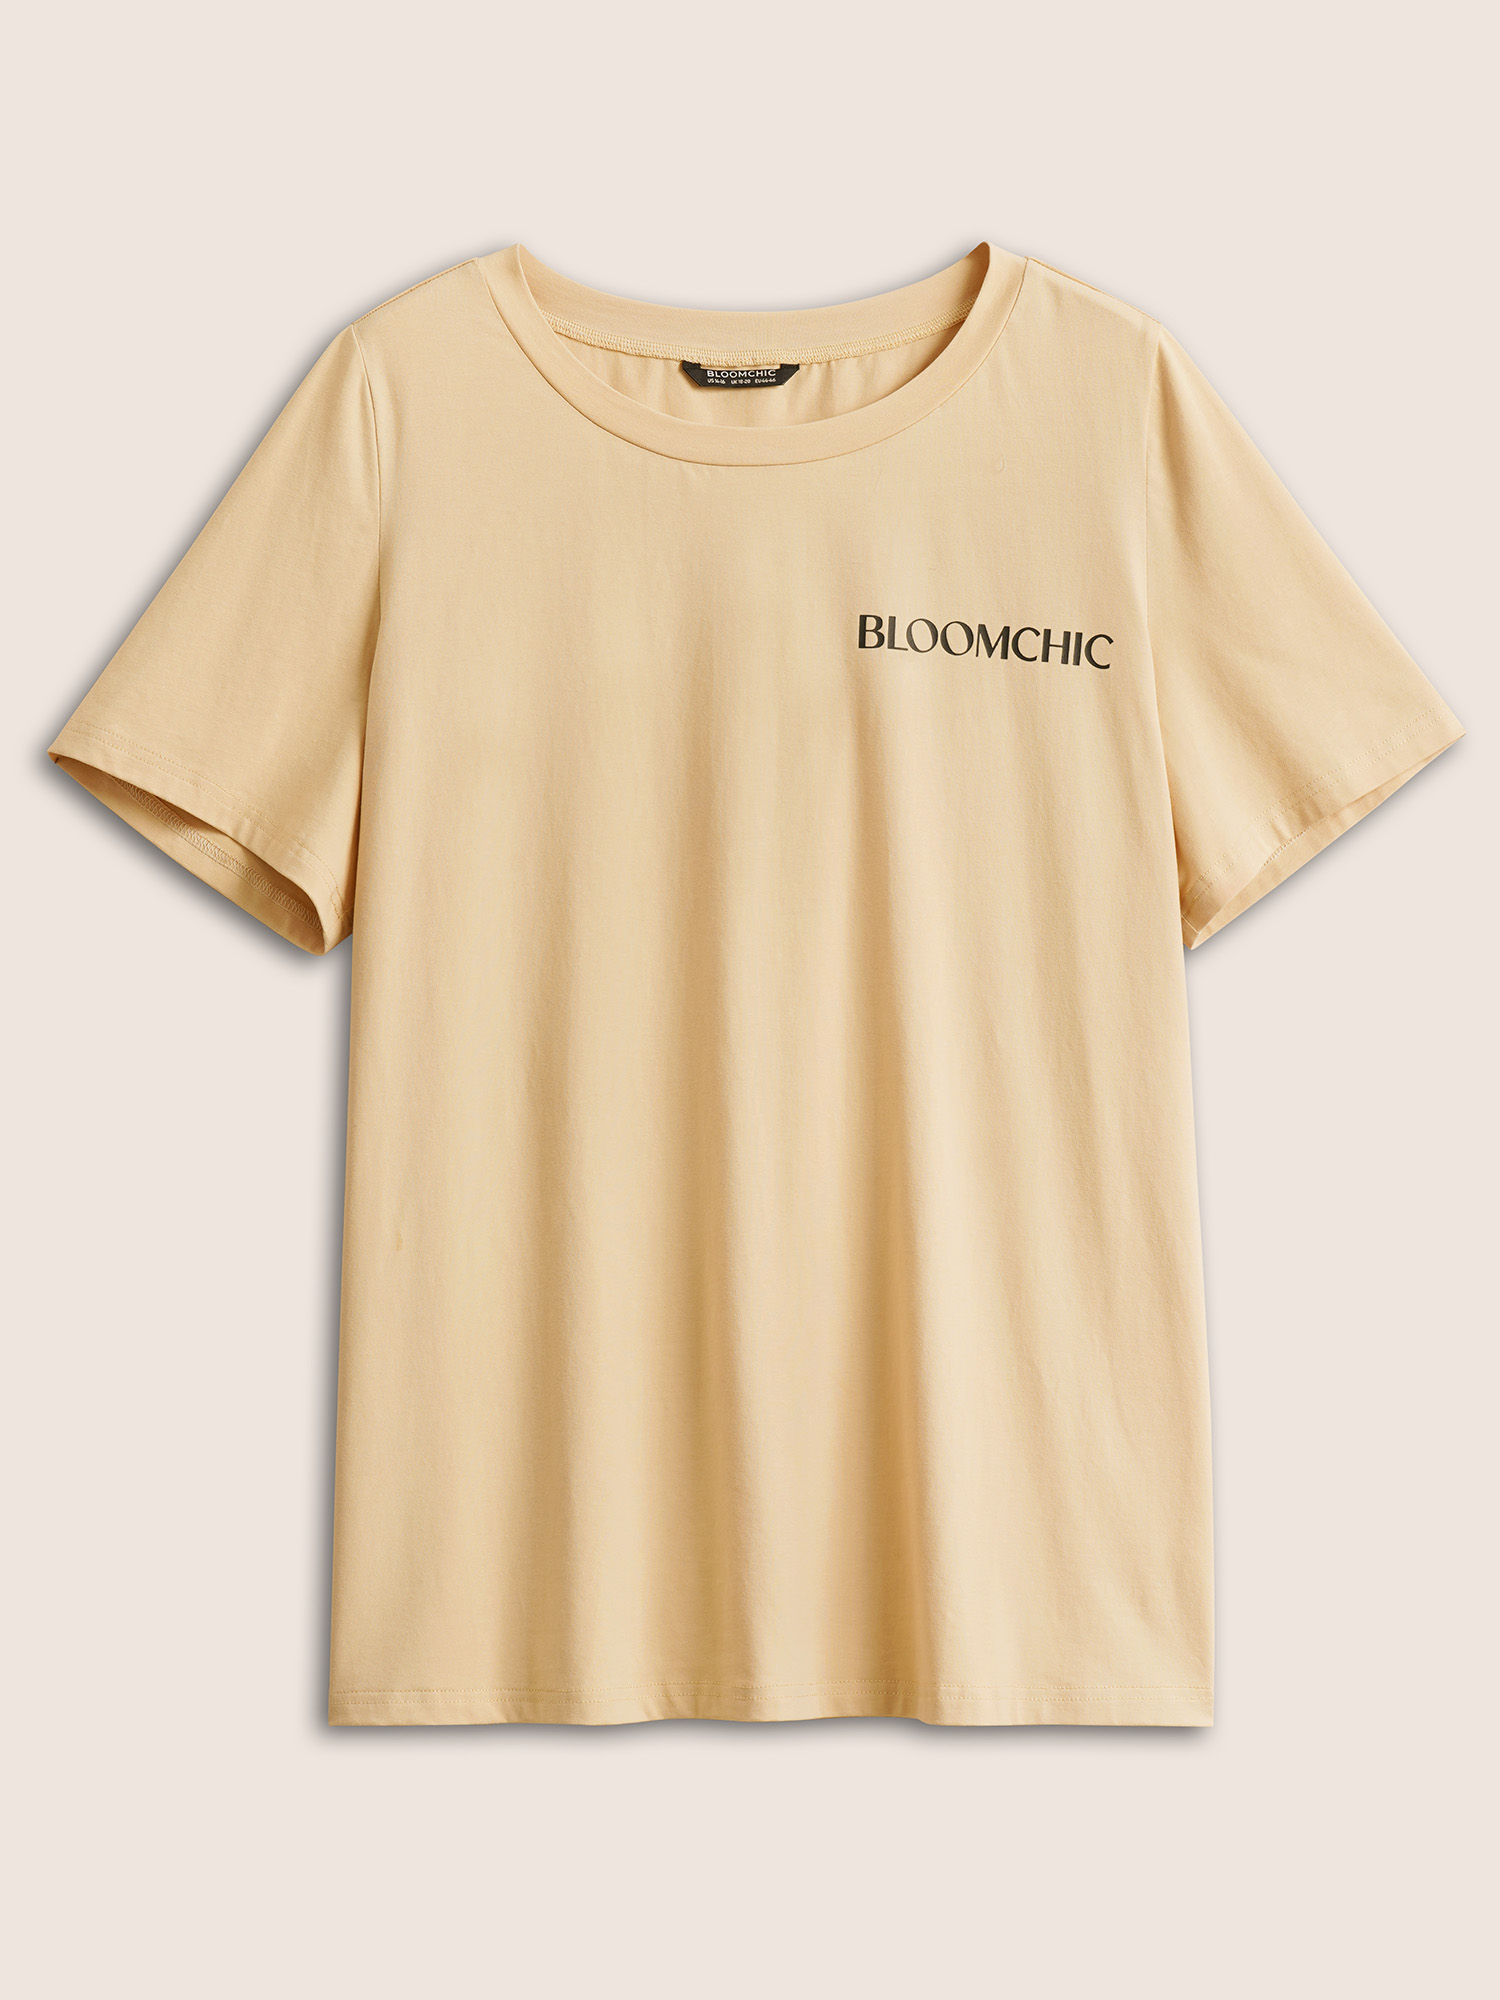 

Plus Size BLOOMCHIC Basic Solid Crew Neck T-shirt Apricot Women Casual Non Positive slogan Round Neck Everyday T-shirts BloomChic